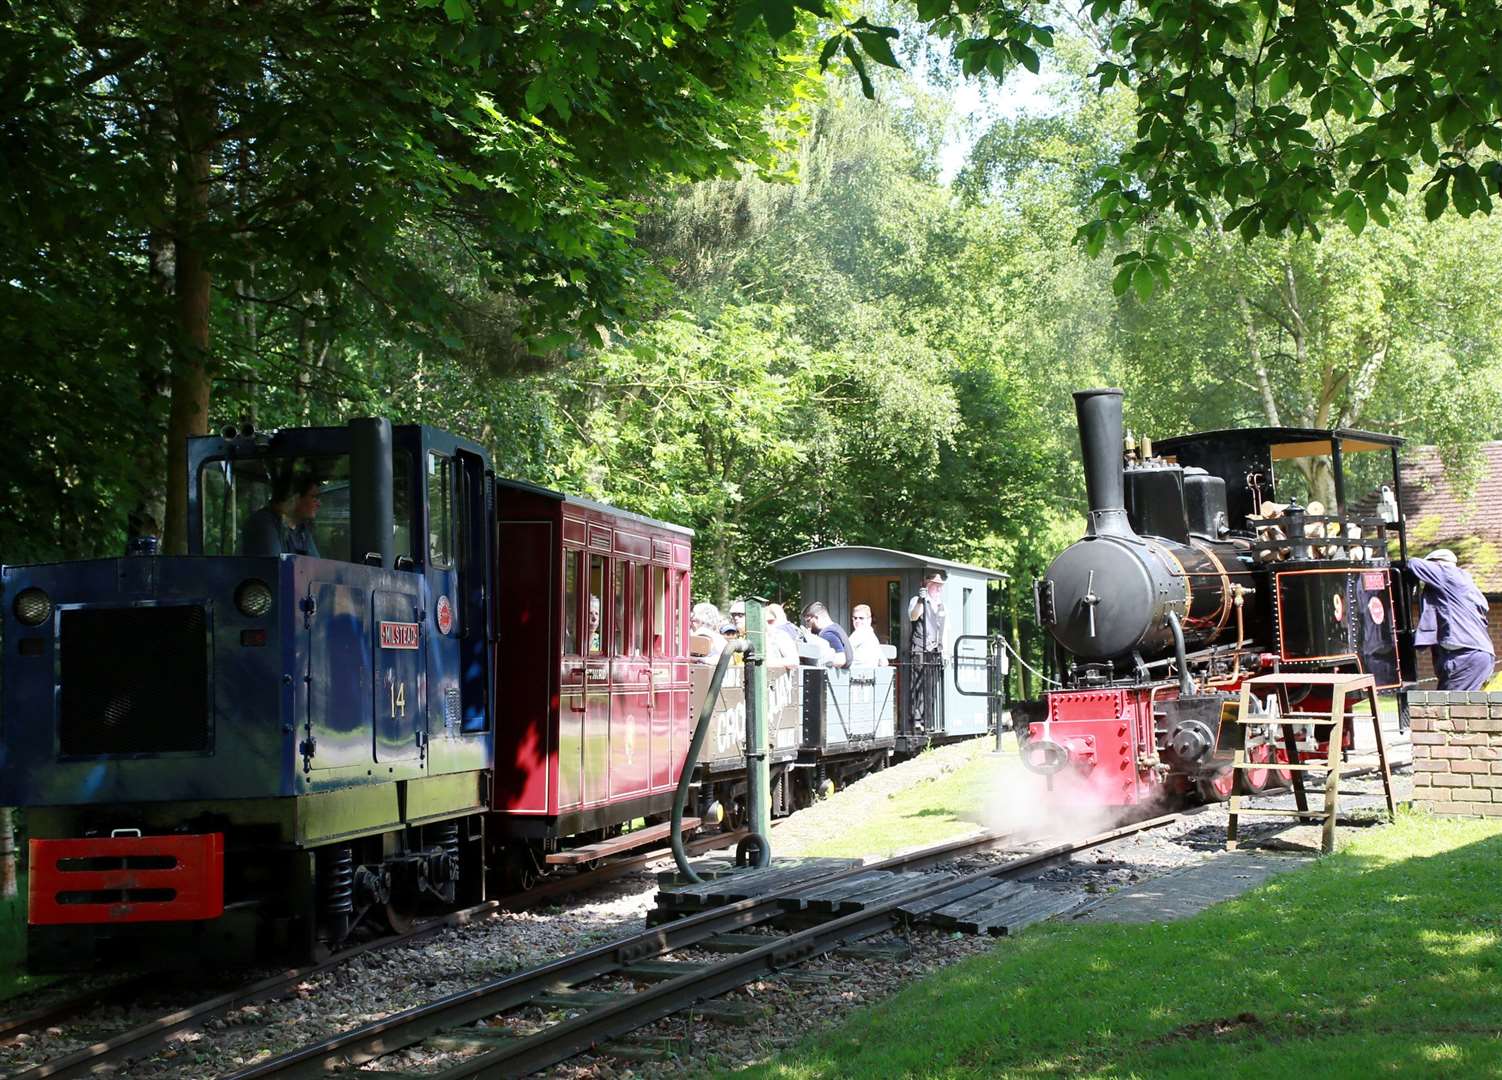 The Bredgar and Wormshill Light Railway